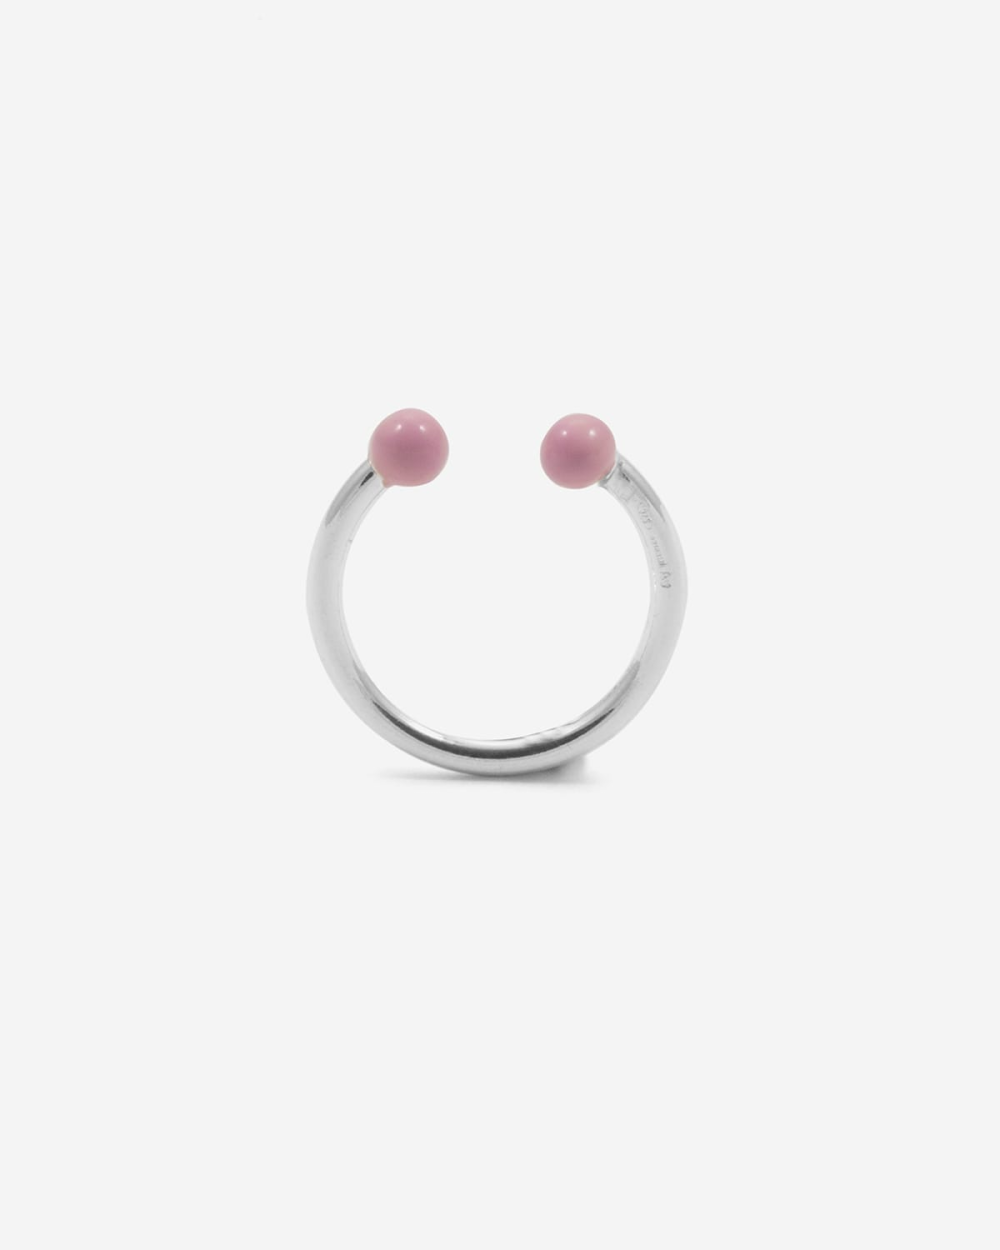 LARGE PIERCING RING WITH PINK SPHERES